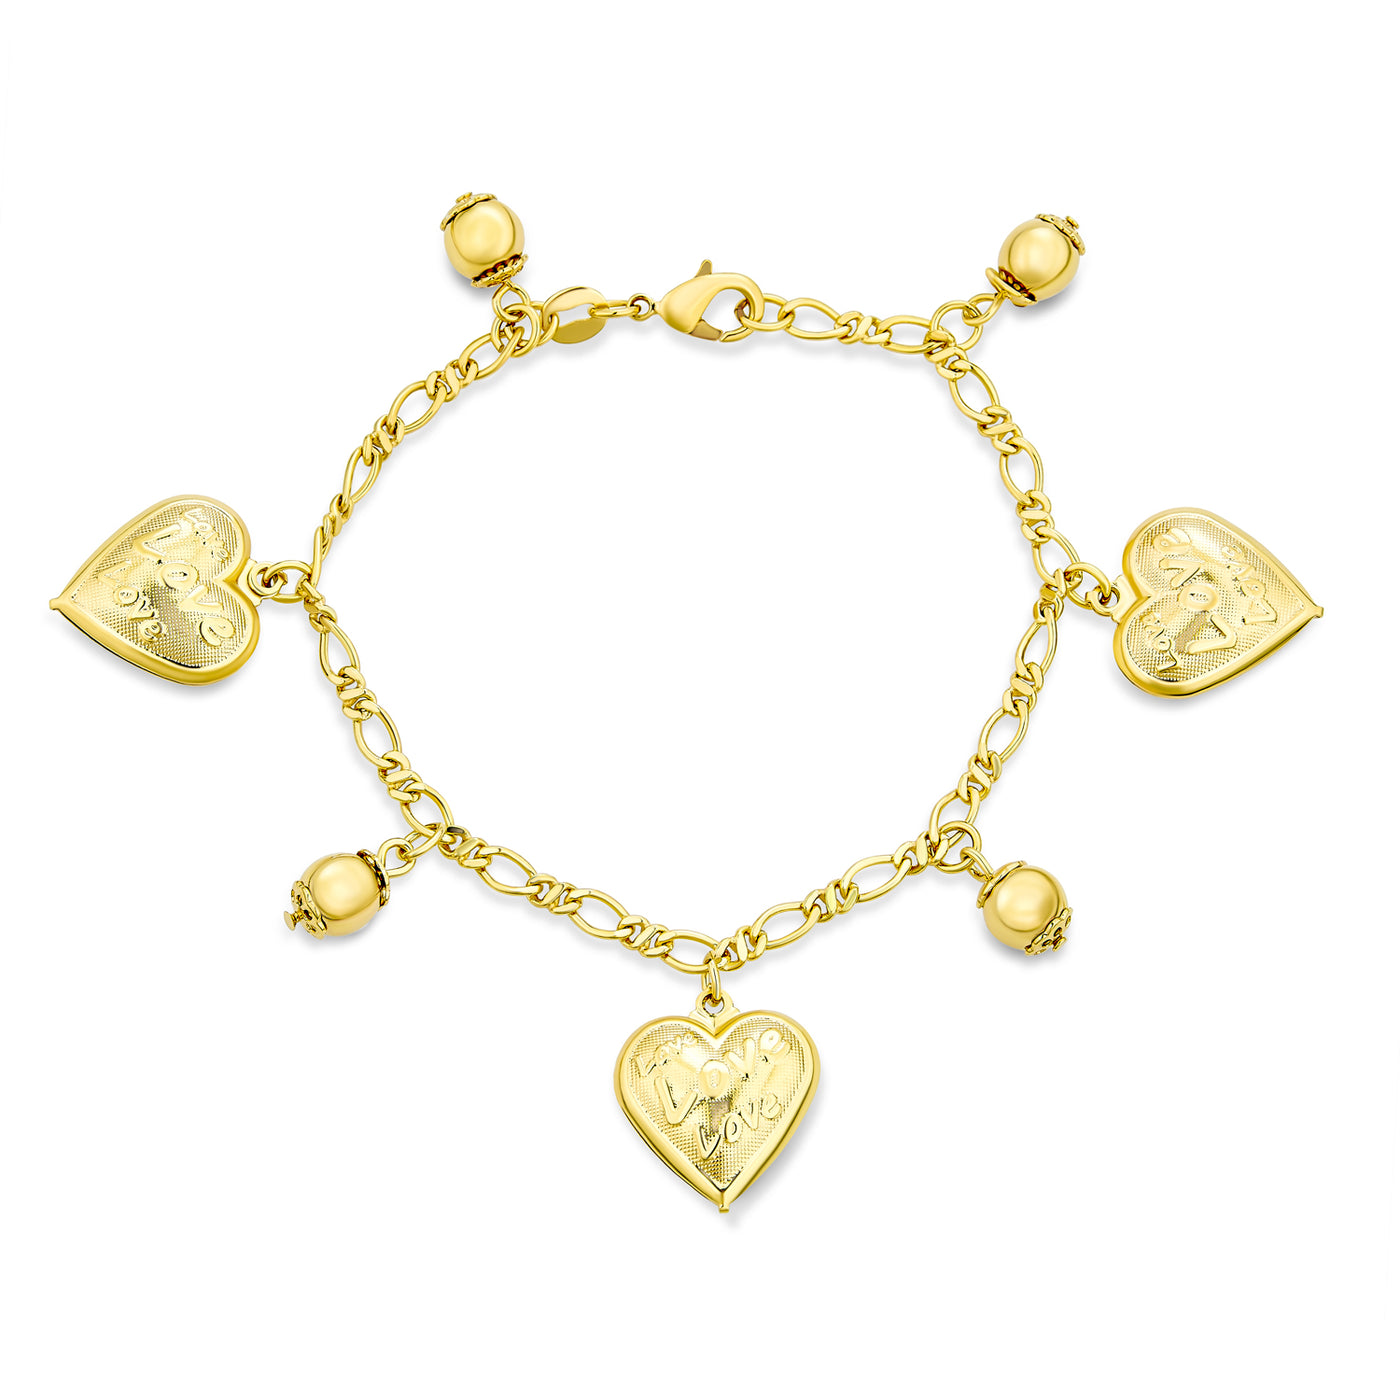 Message Love Hearts Charm Bracelet For Women Gold Plated 7.5 Inch